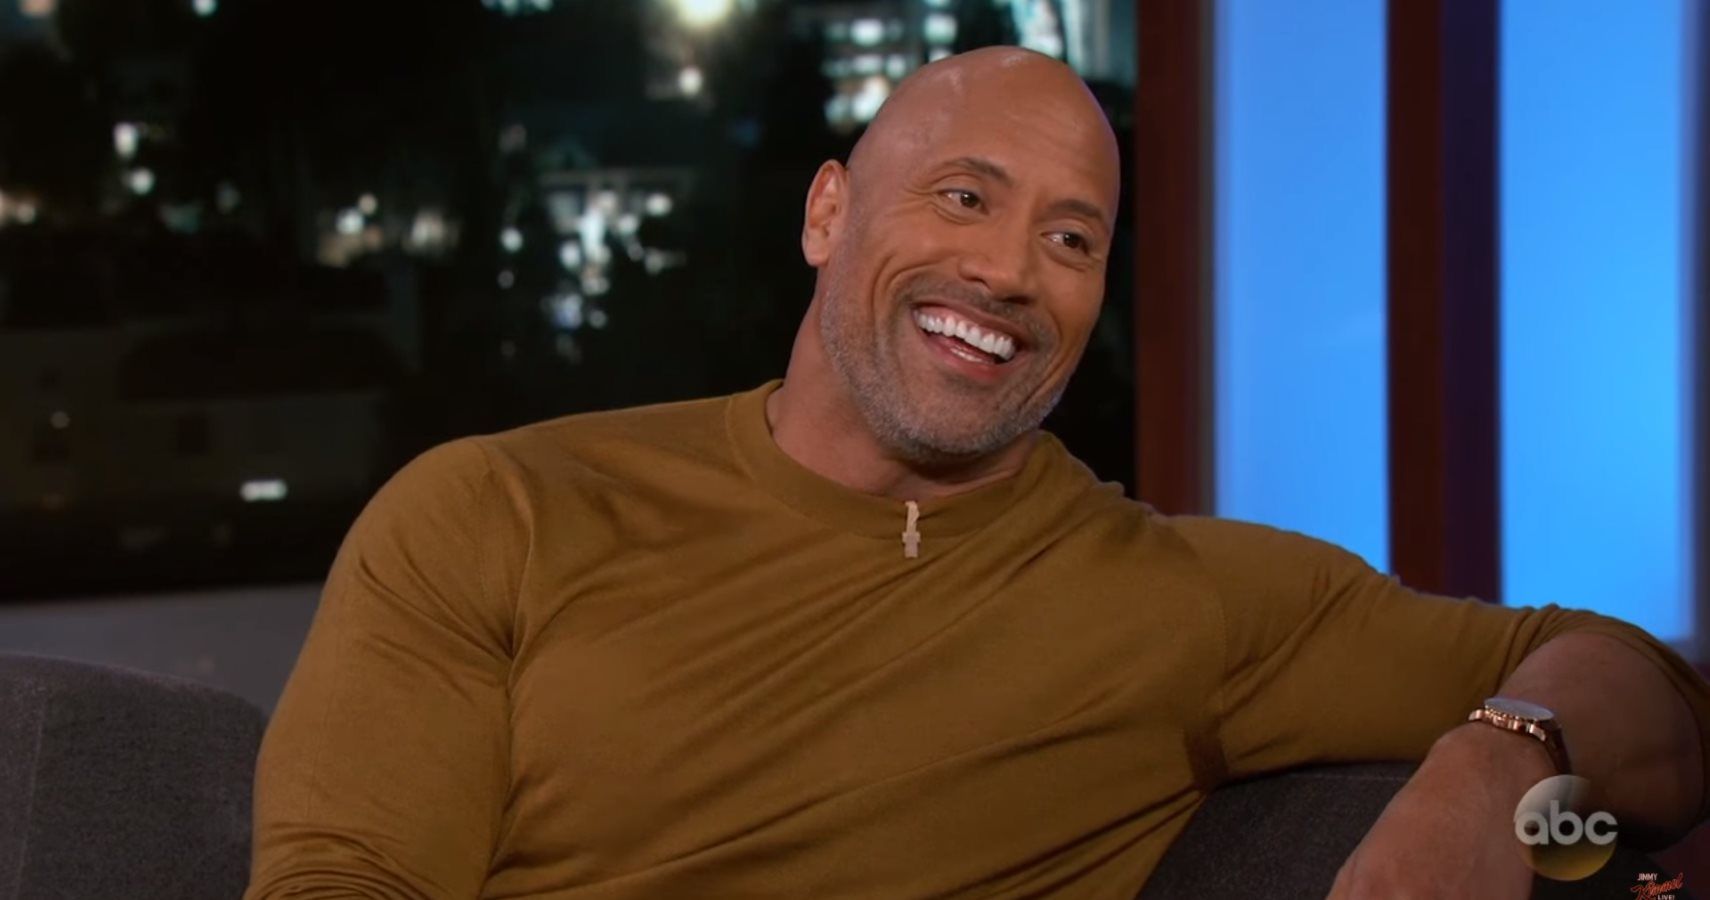 Dwayne Johnson Might Be Out Of Town When Second Child Is Born